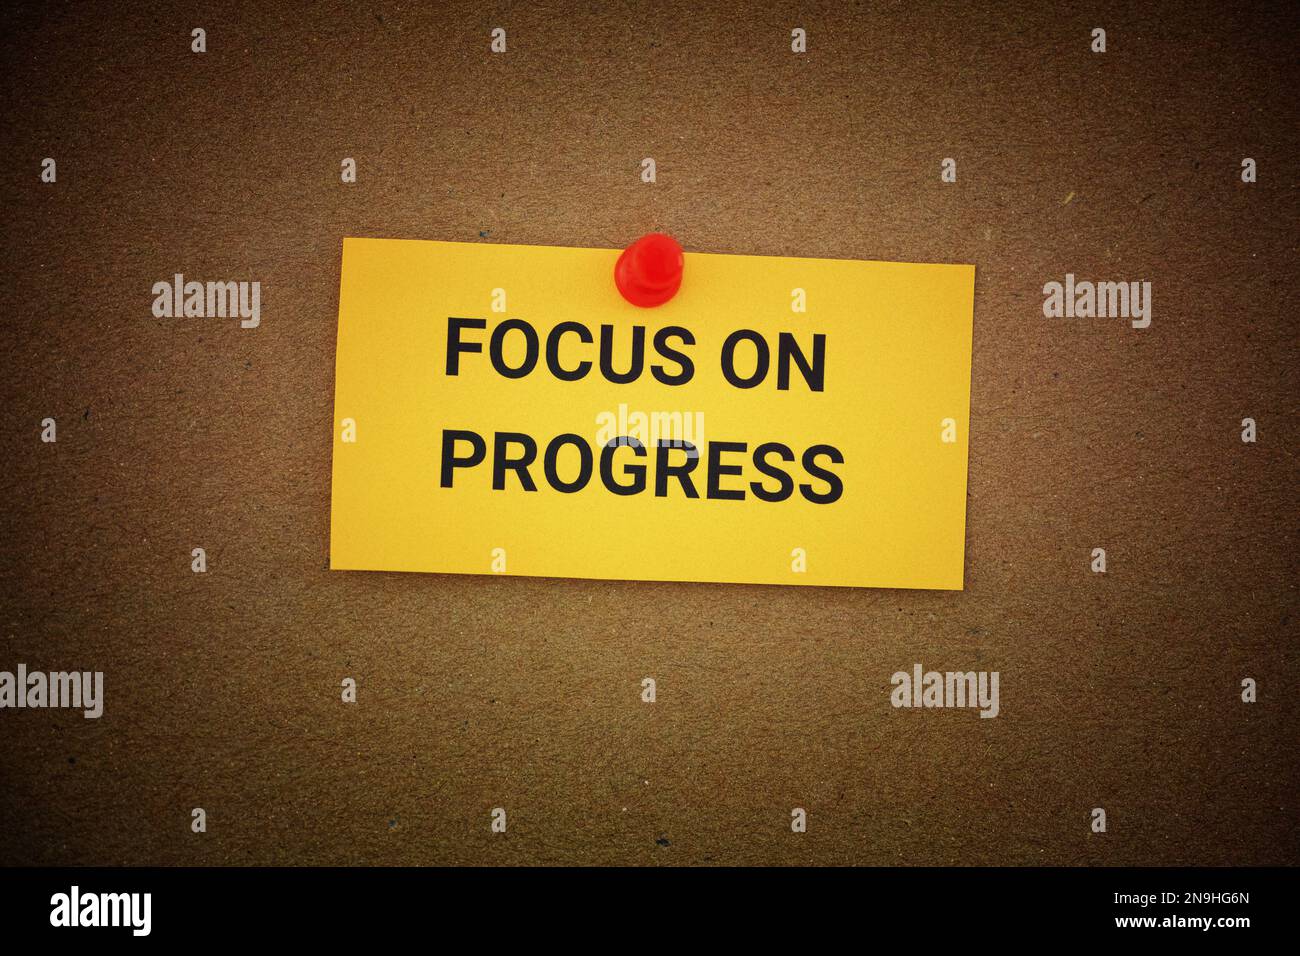 A yellow paper note with the phrase Focus On Progress on it pinned to a cardboard background. Close up. Stock Photo